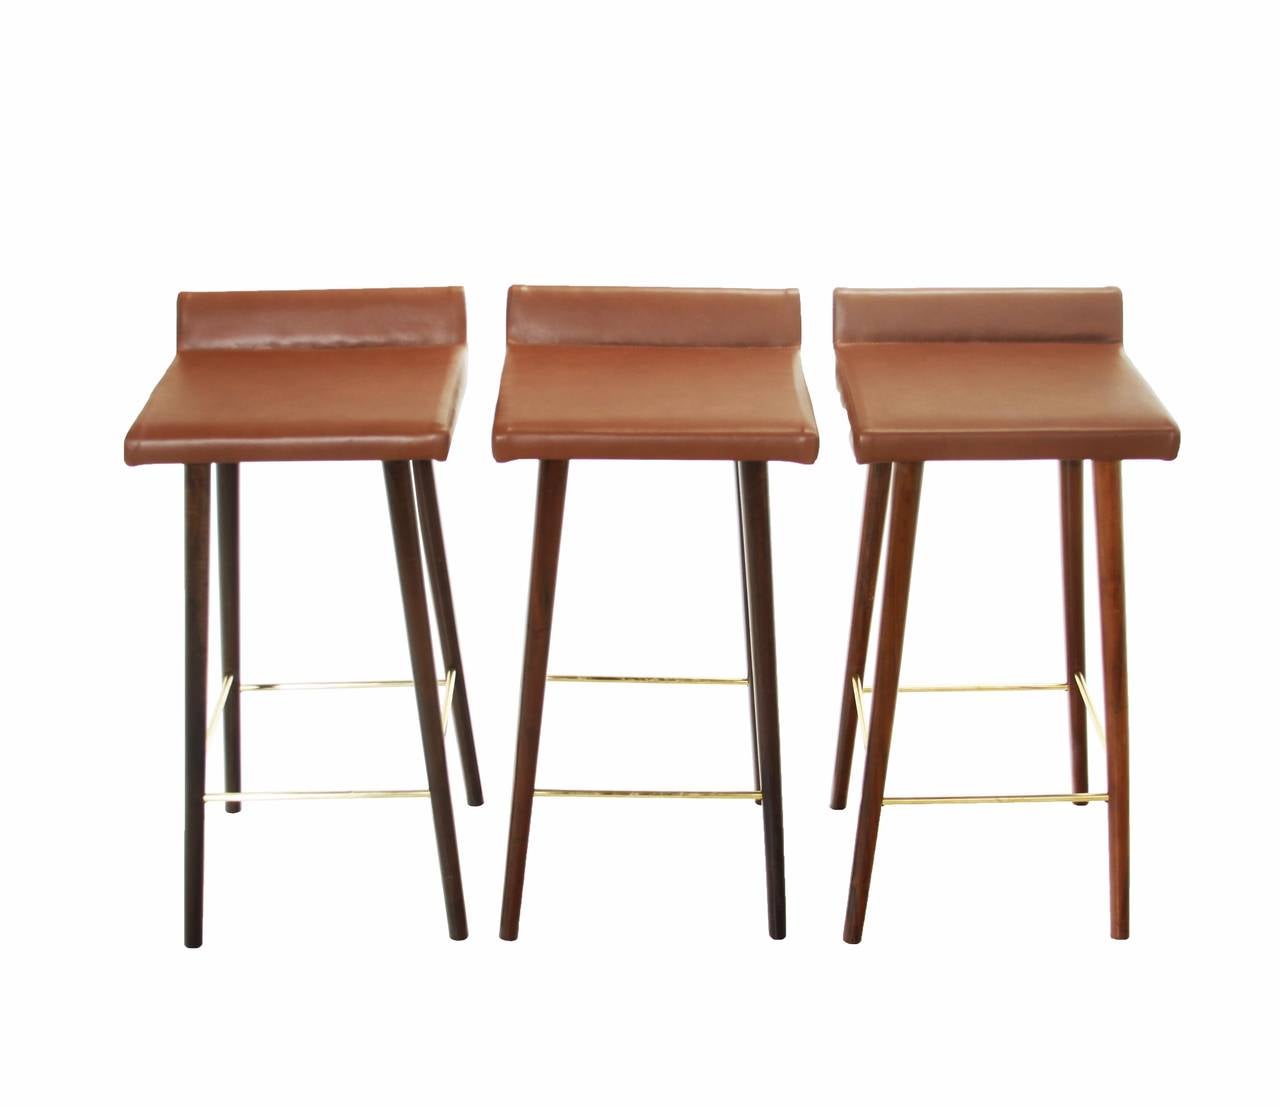 Brazilian Set of Three Wood, Leather and Brass Bar Stools by Cimo from Brazil